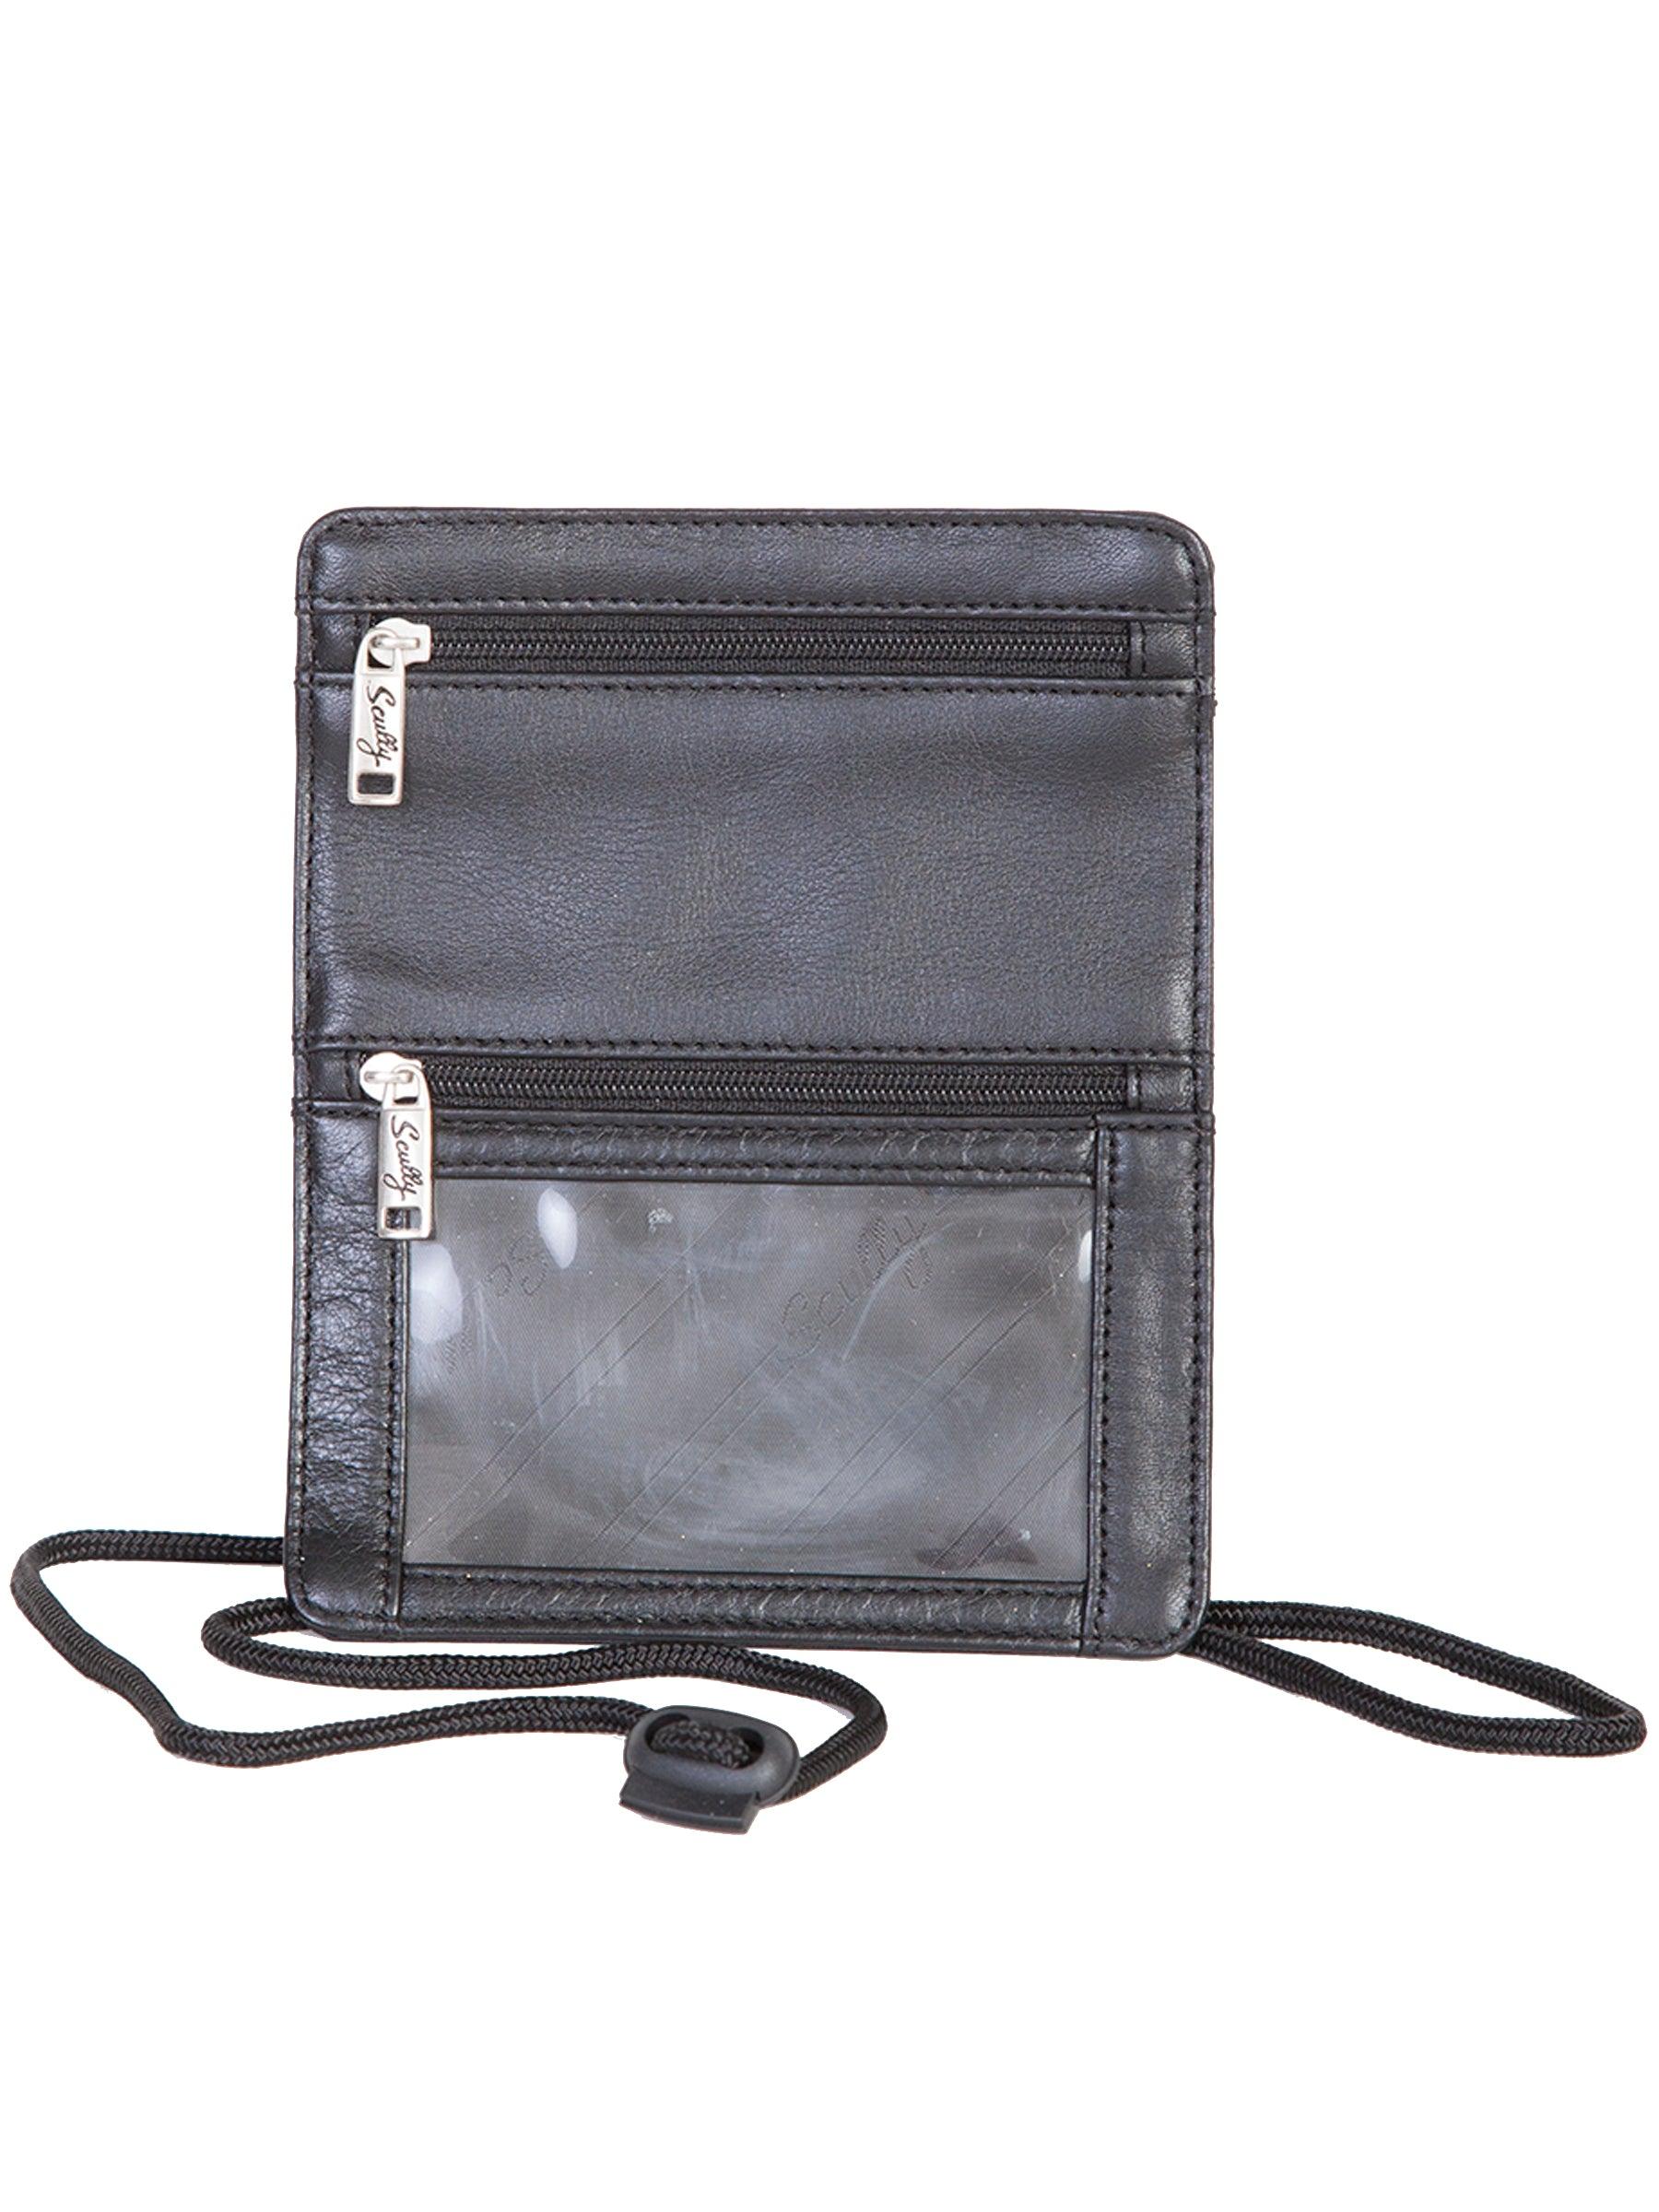 Scully BLACK AIRPORT ID HOLDER W/CORD - Flyclothing LLC